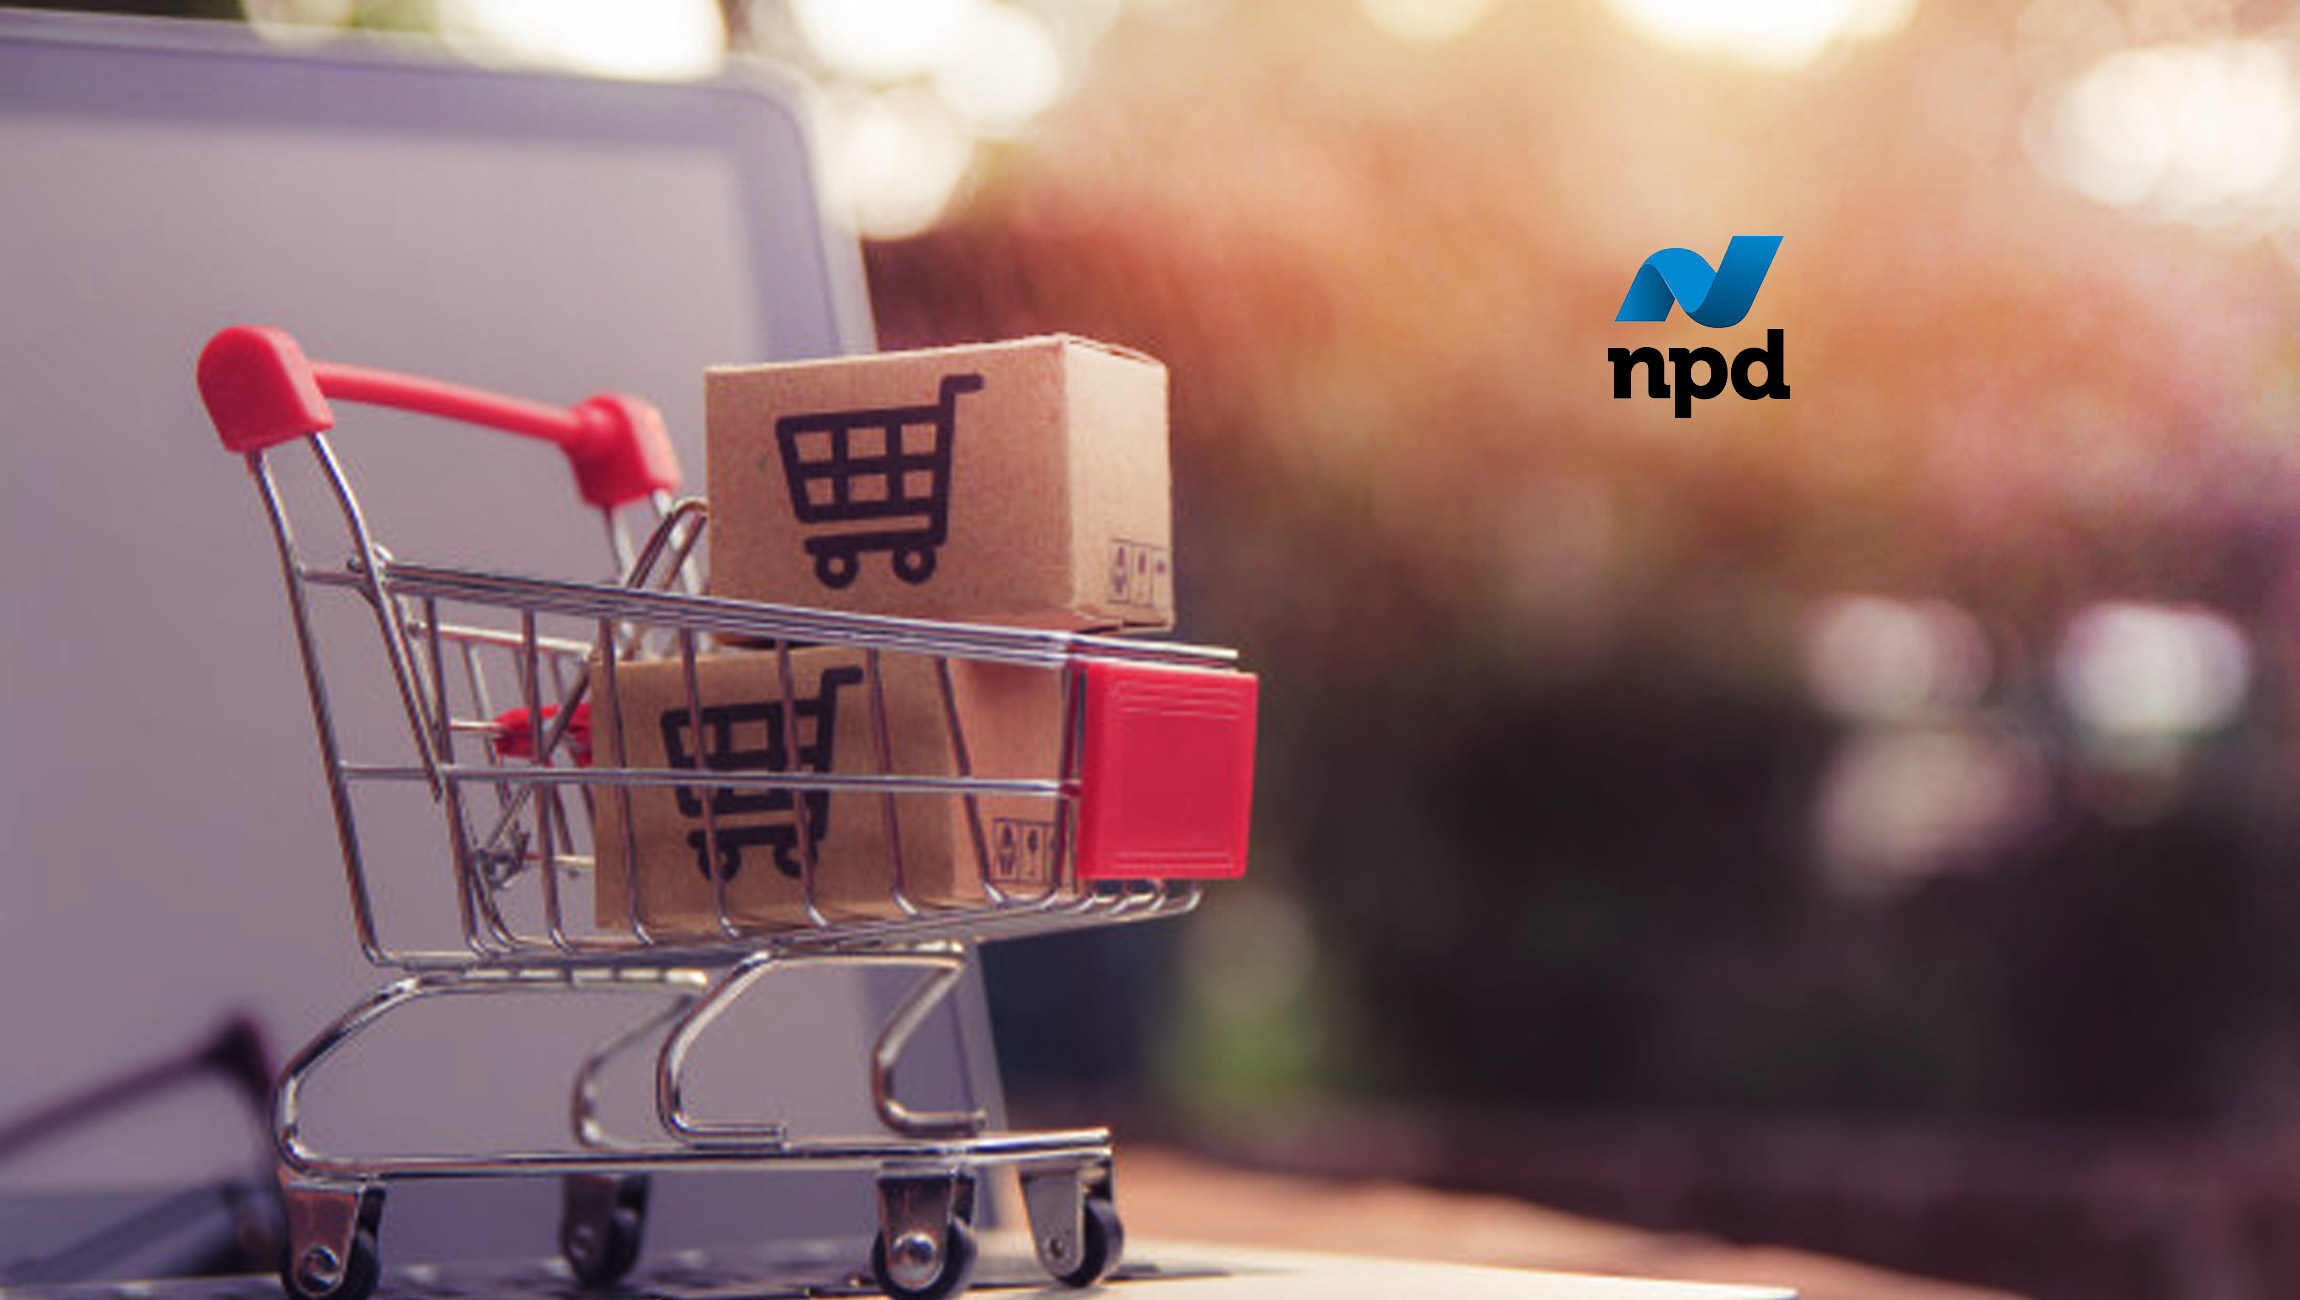 Consumers Pull Back on Purchasing as Retail Prices Remain Elevated, Reports NPD